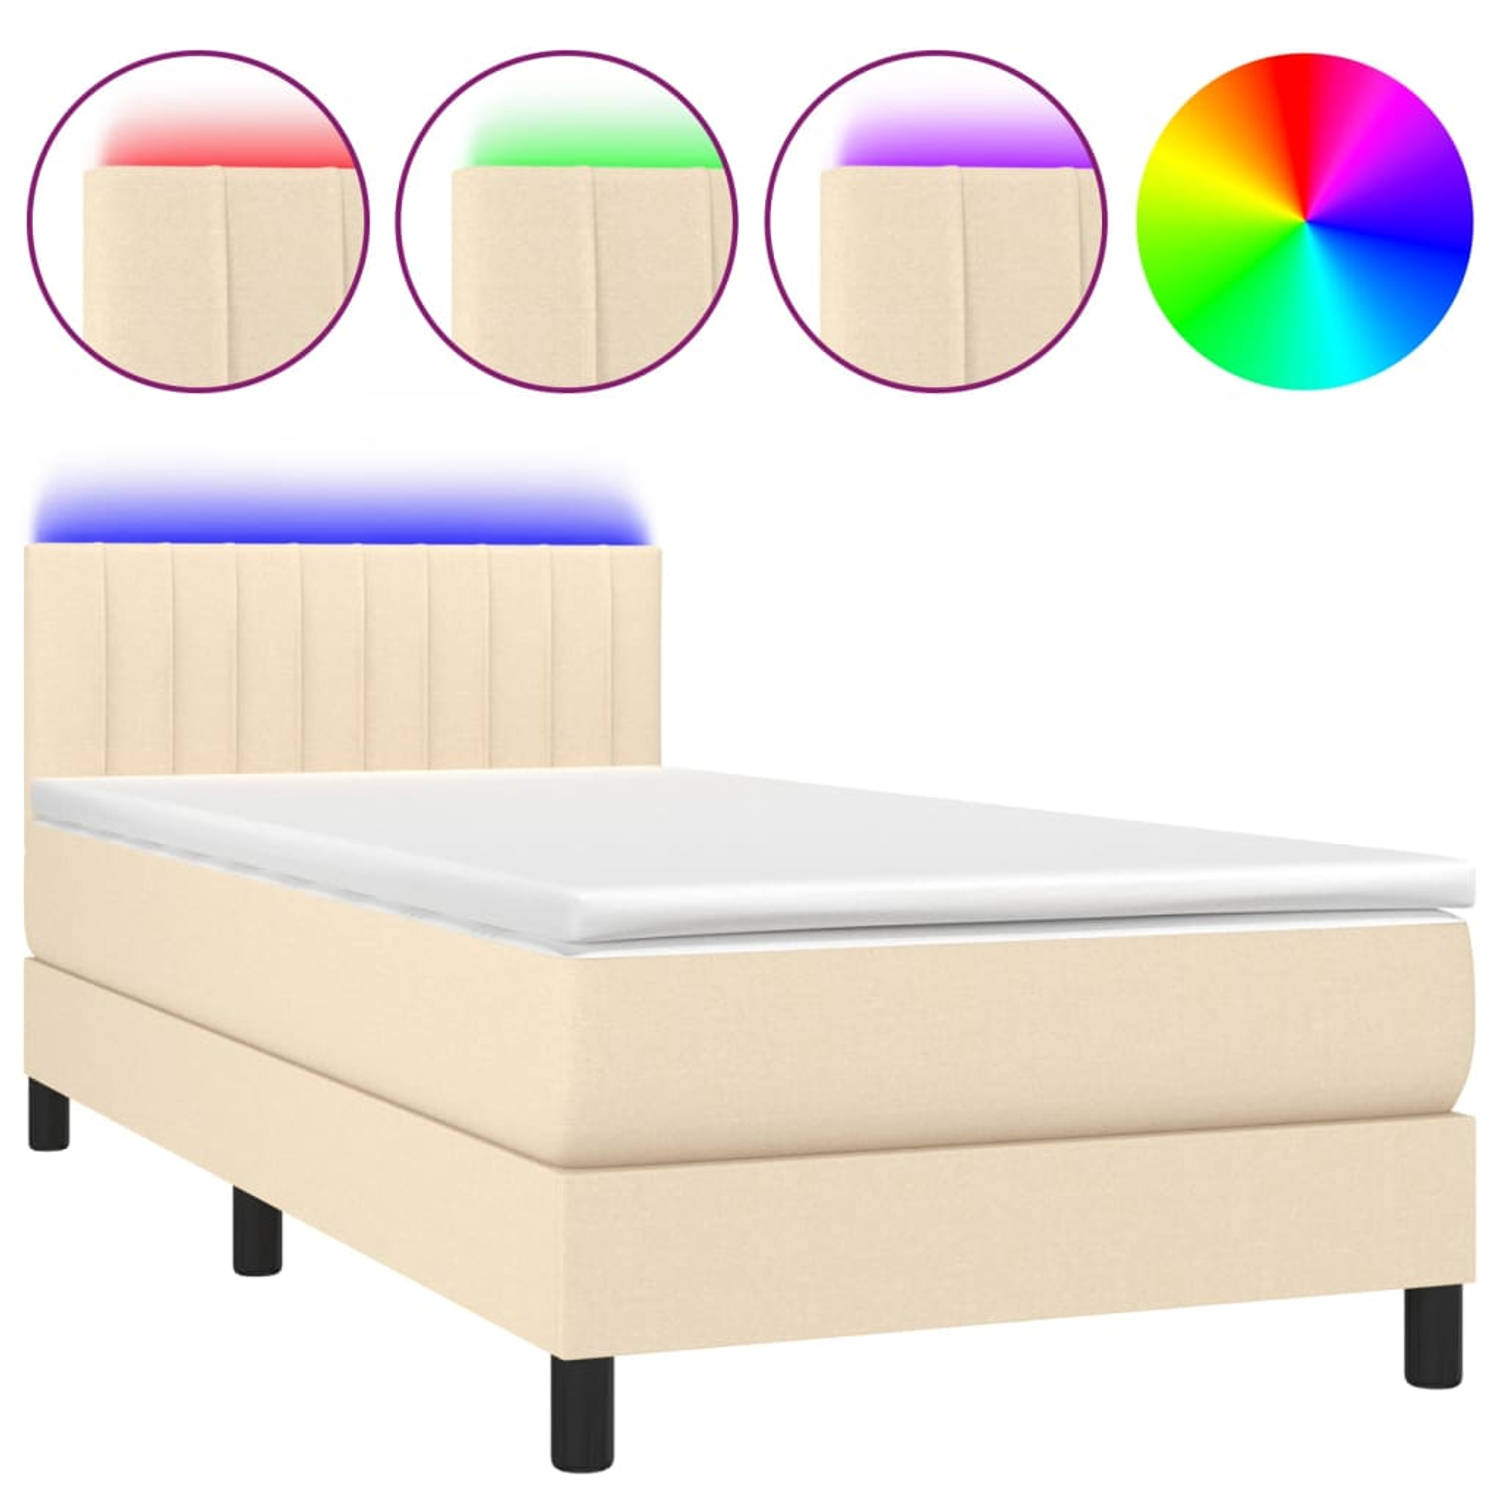 The Living Store Boxspring met matras en LED stof crèmekleurig 100x200 cm - Boxspring - Boxsprings - Bed - Slaapmeubel - Boxspringbed - Boxspring Bed - Tweepersoonsbed - Bed Met Ma